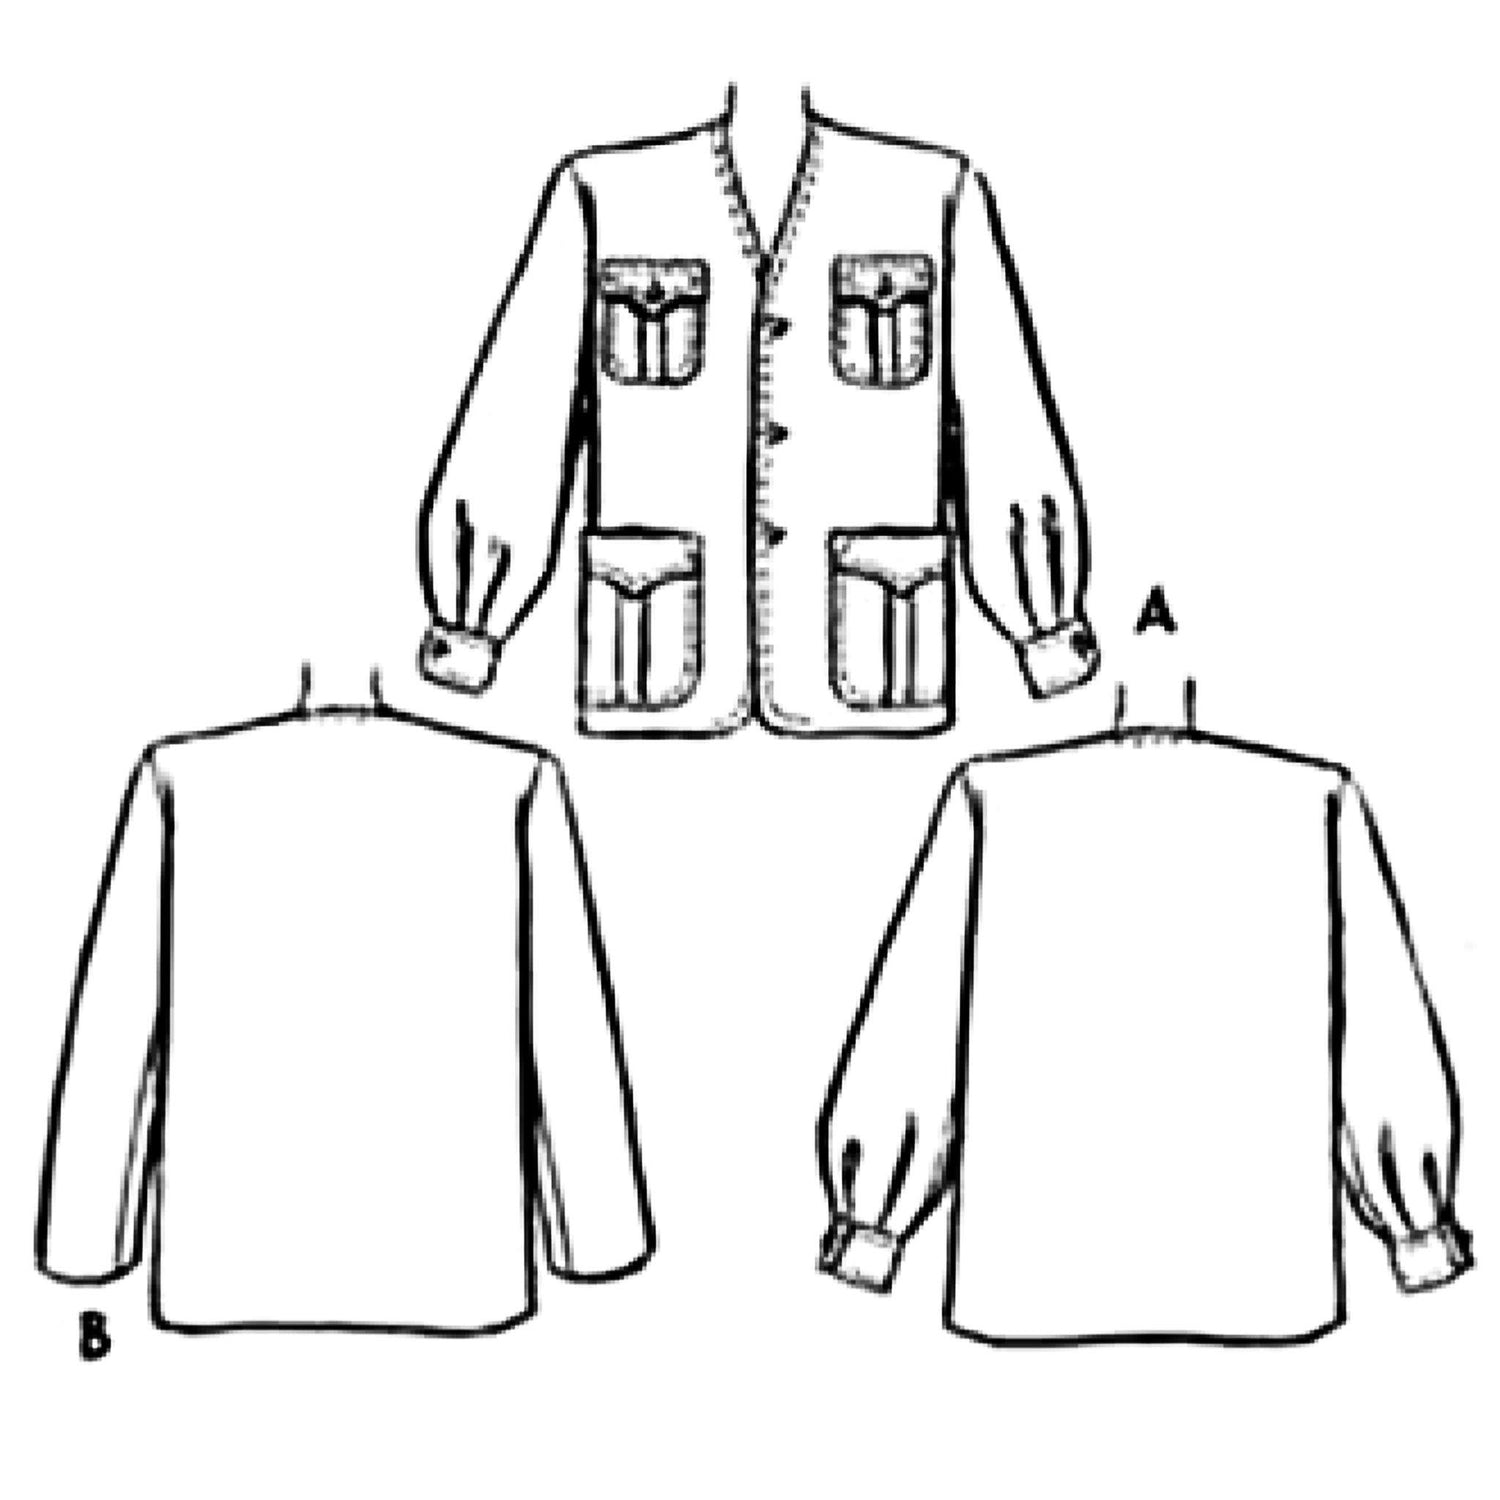 Line drawing of View A front and back, and View B back